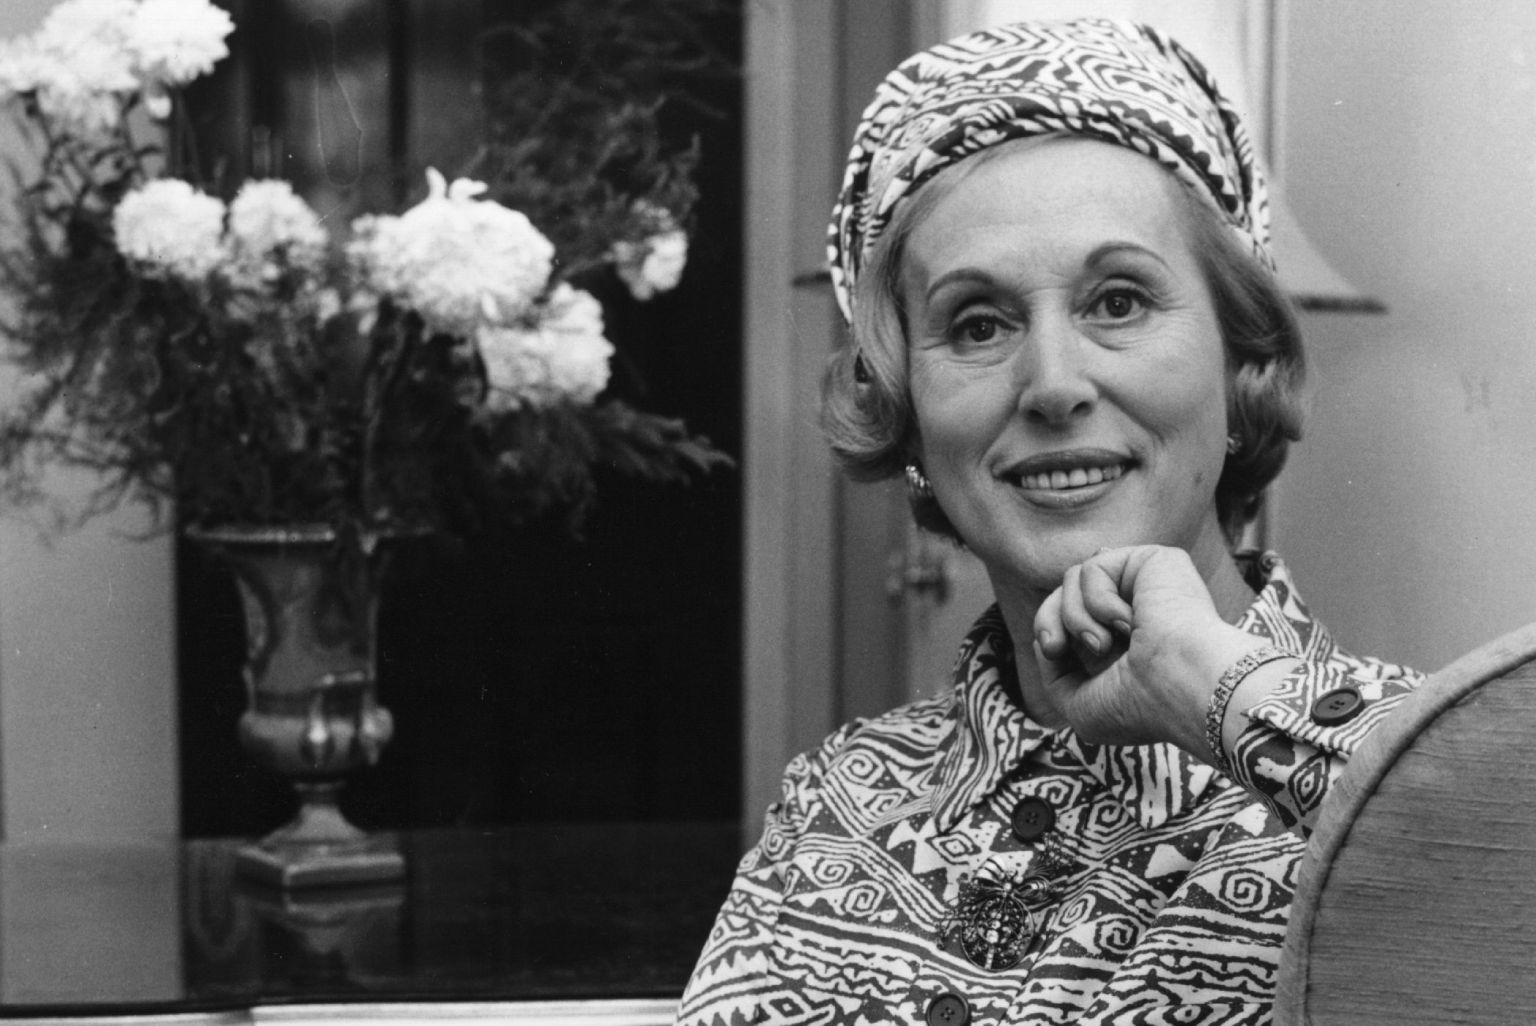 "I clearly imagined my success and turned it into reality". Business rules of the founder of the cosmetics business empire Estee Lauder